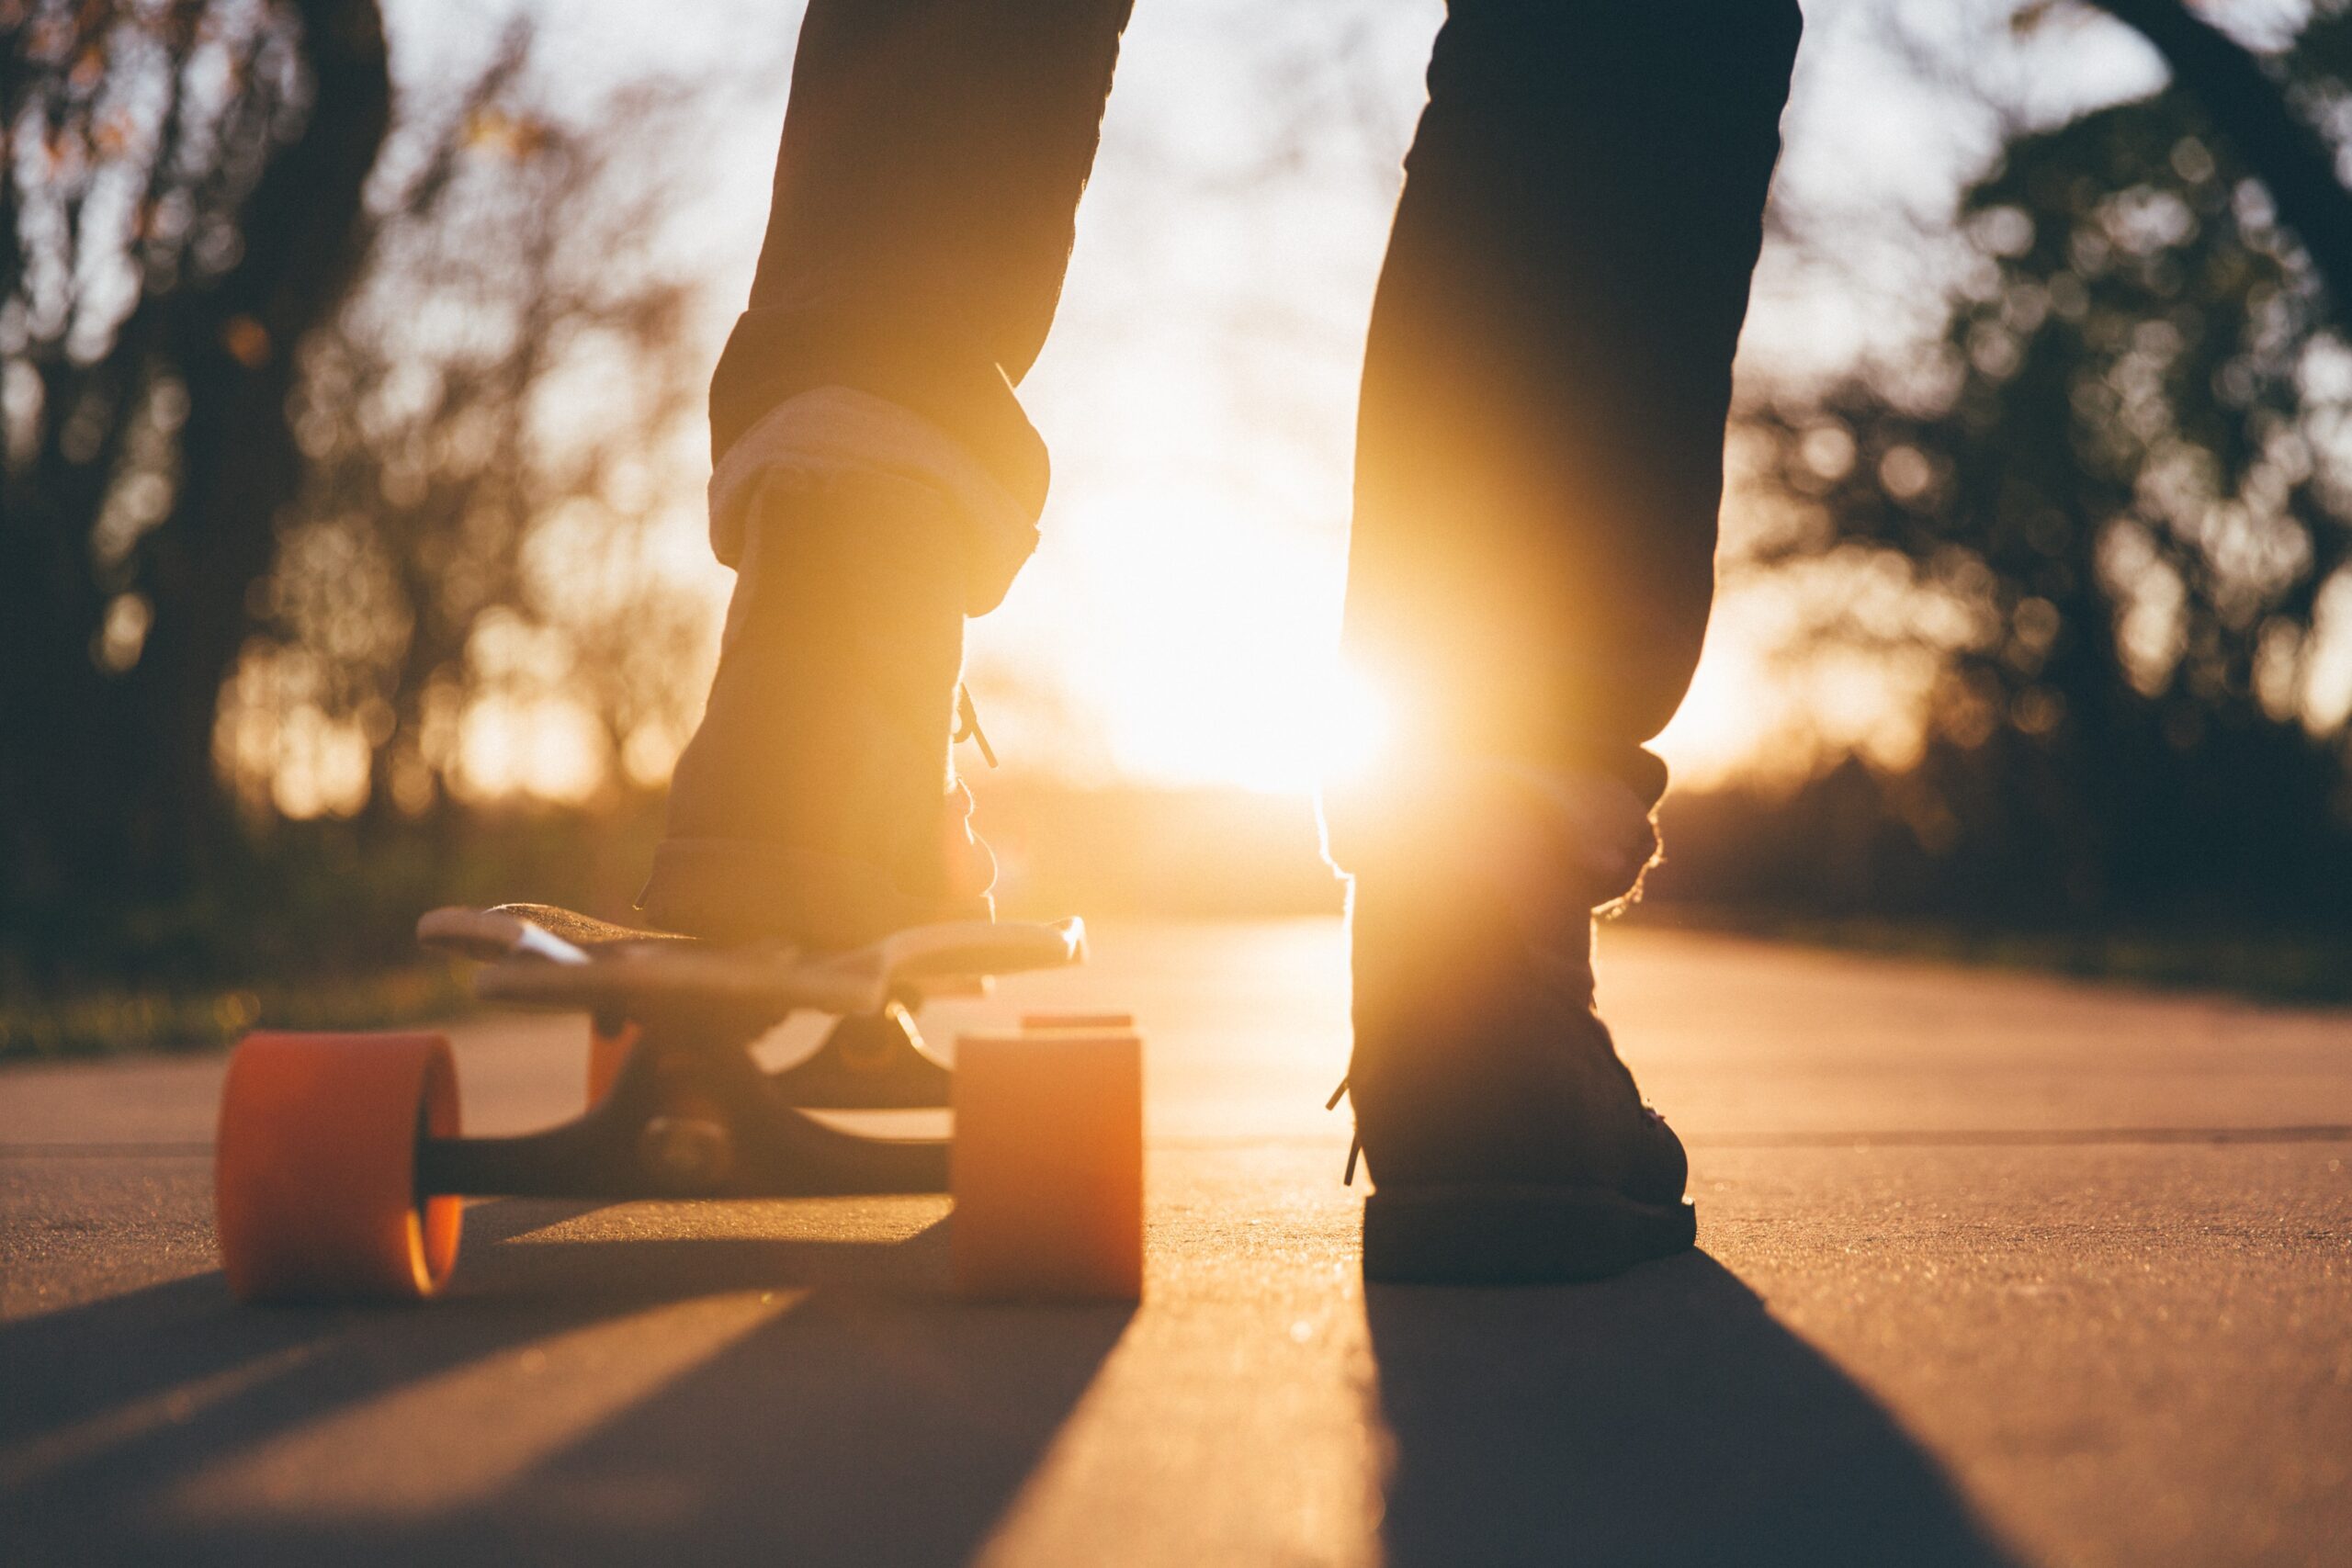 What Are The Benefits Of Skateboard Backpacks With Hydration Systems?